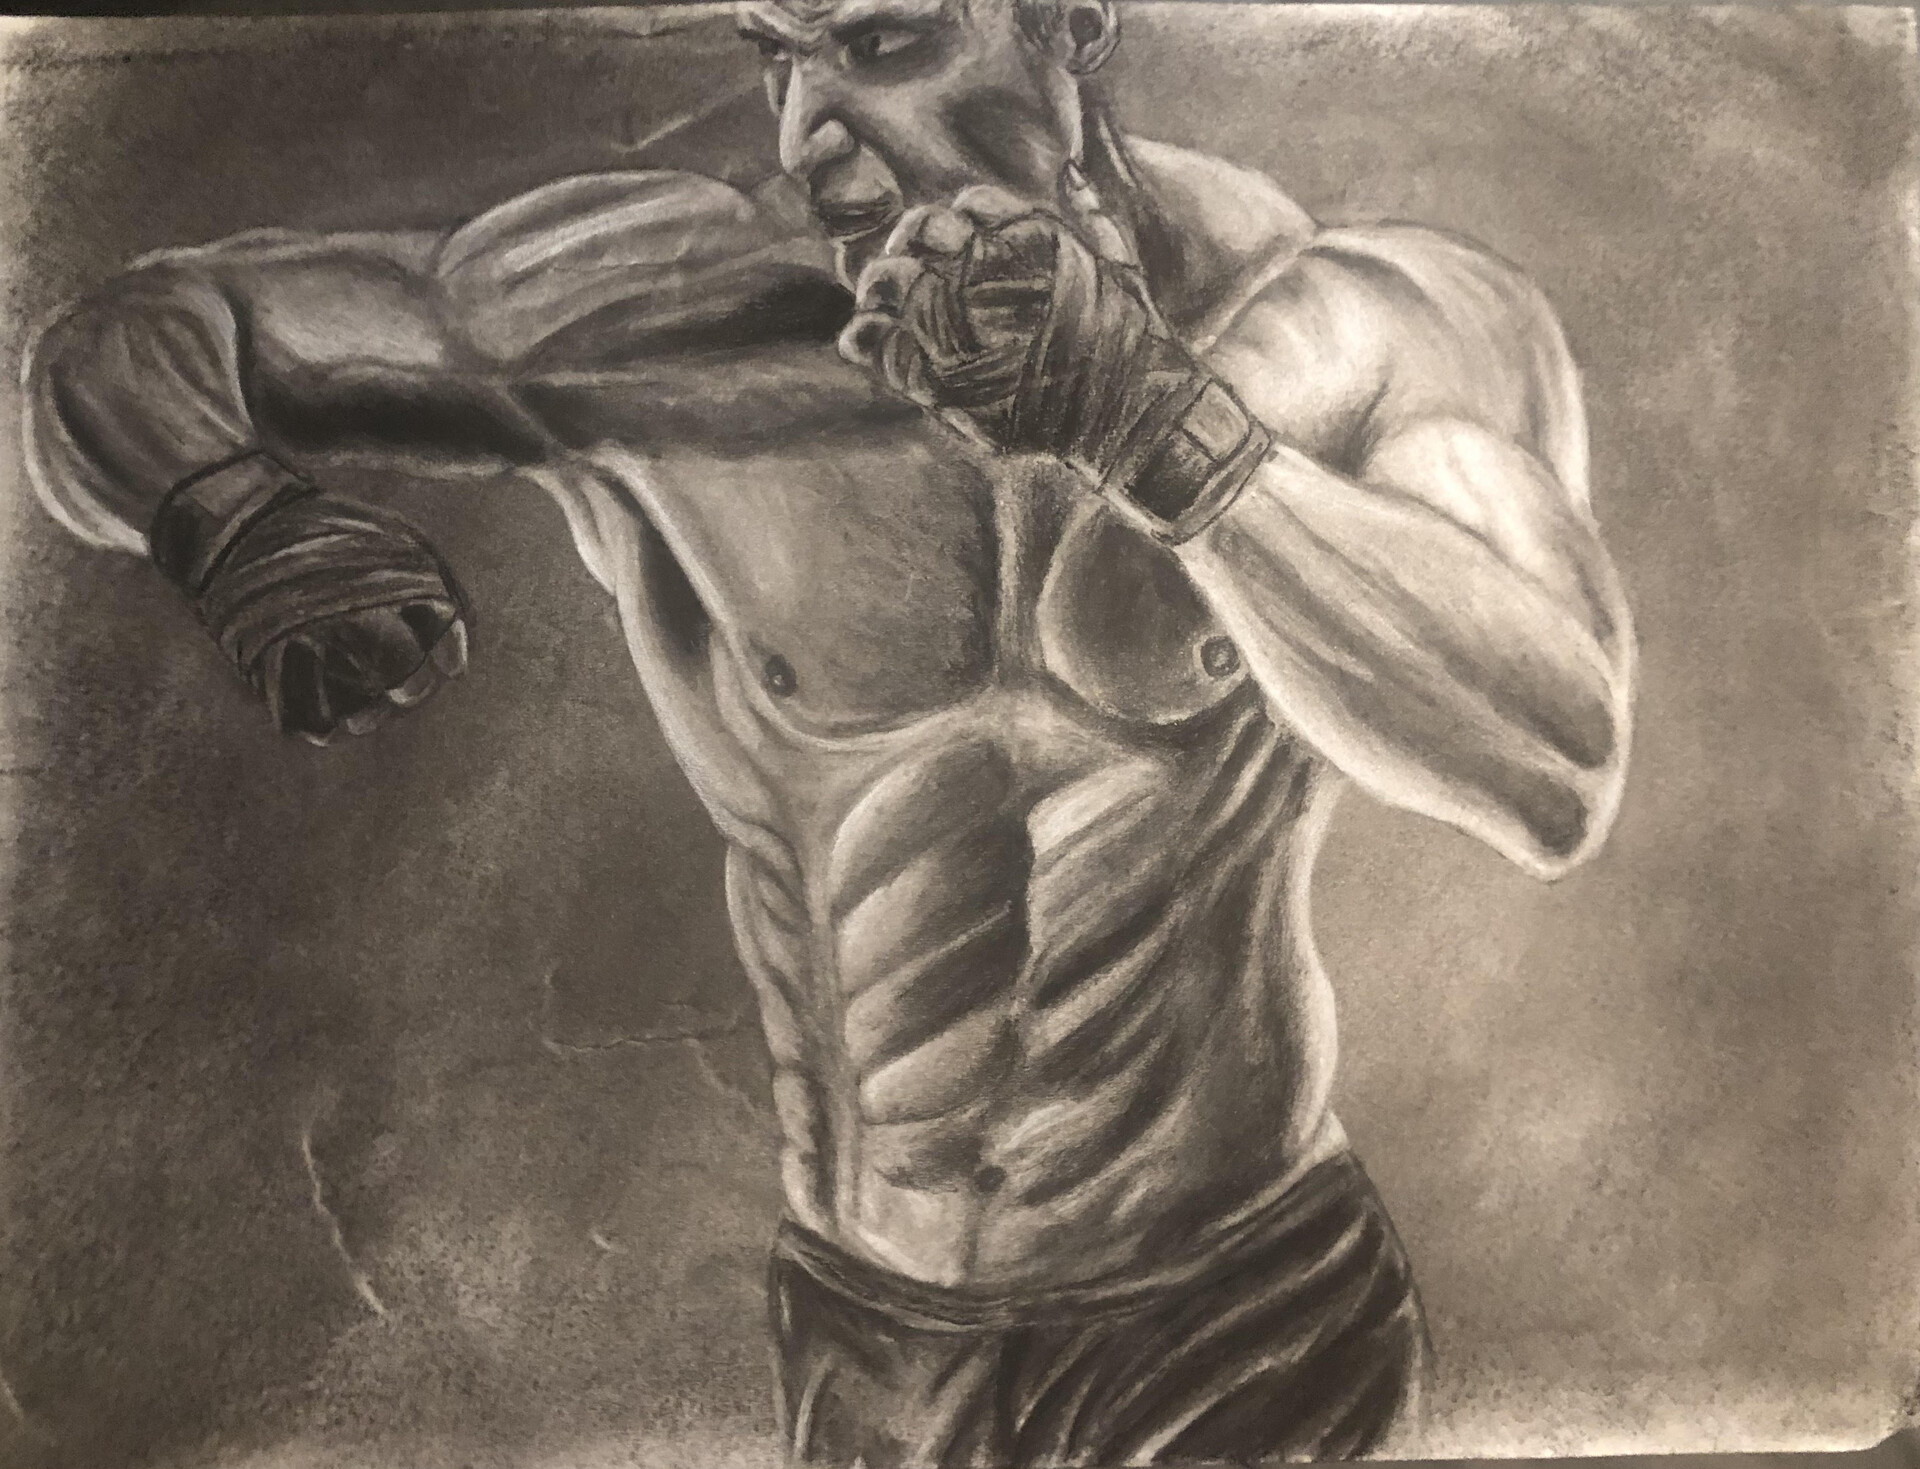 mma fighter drawing